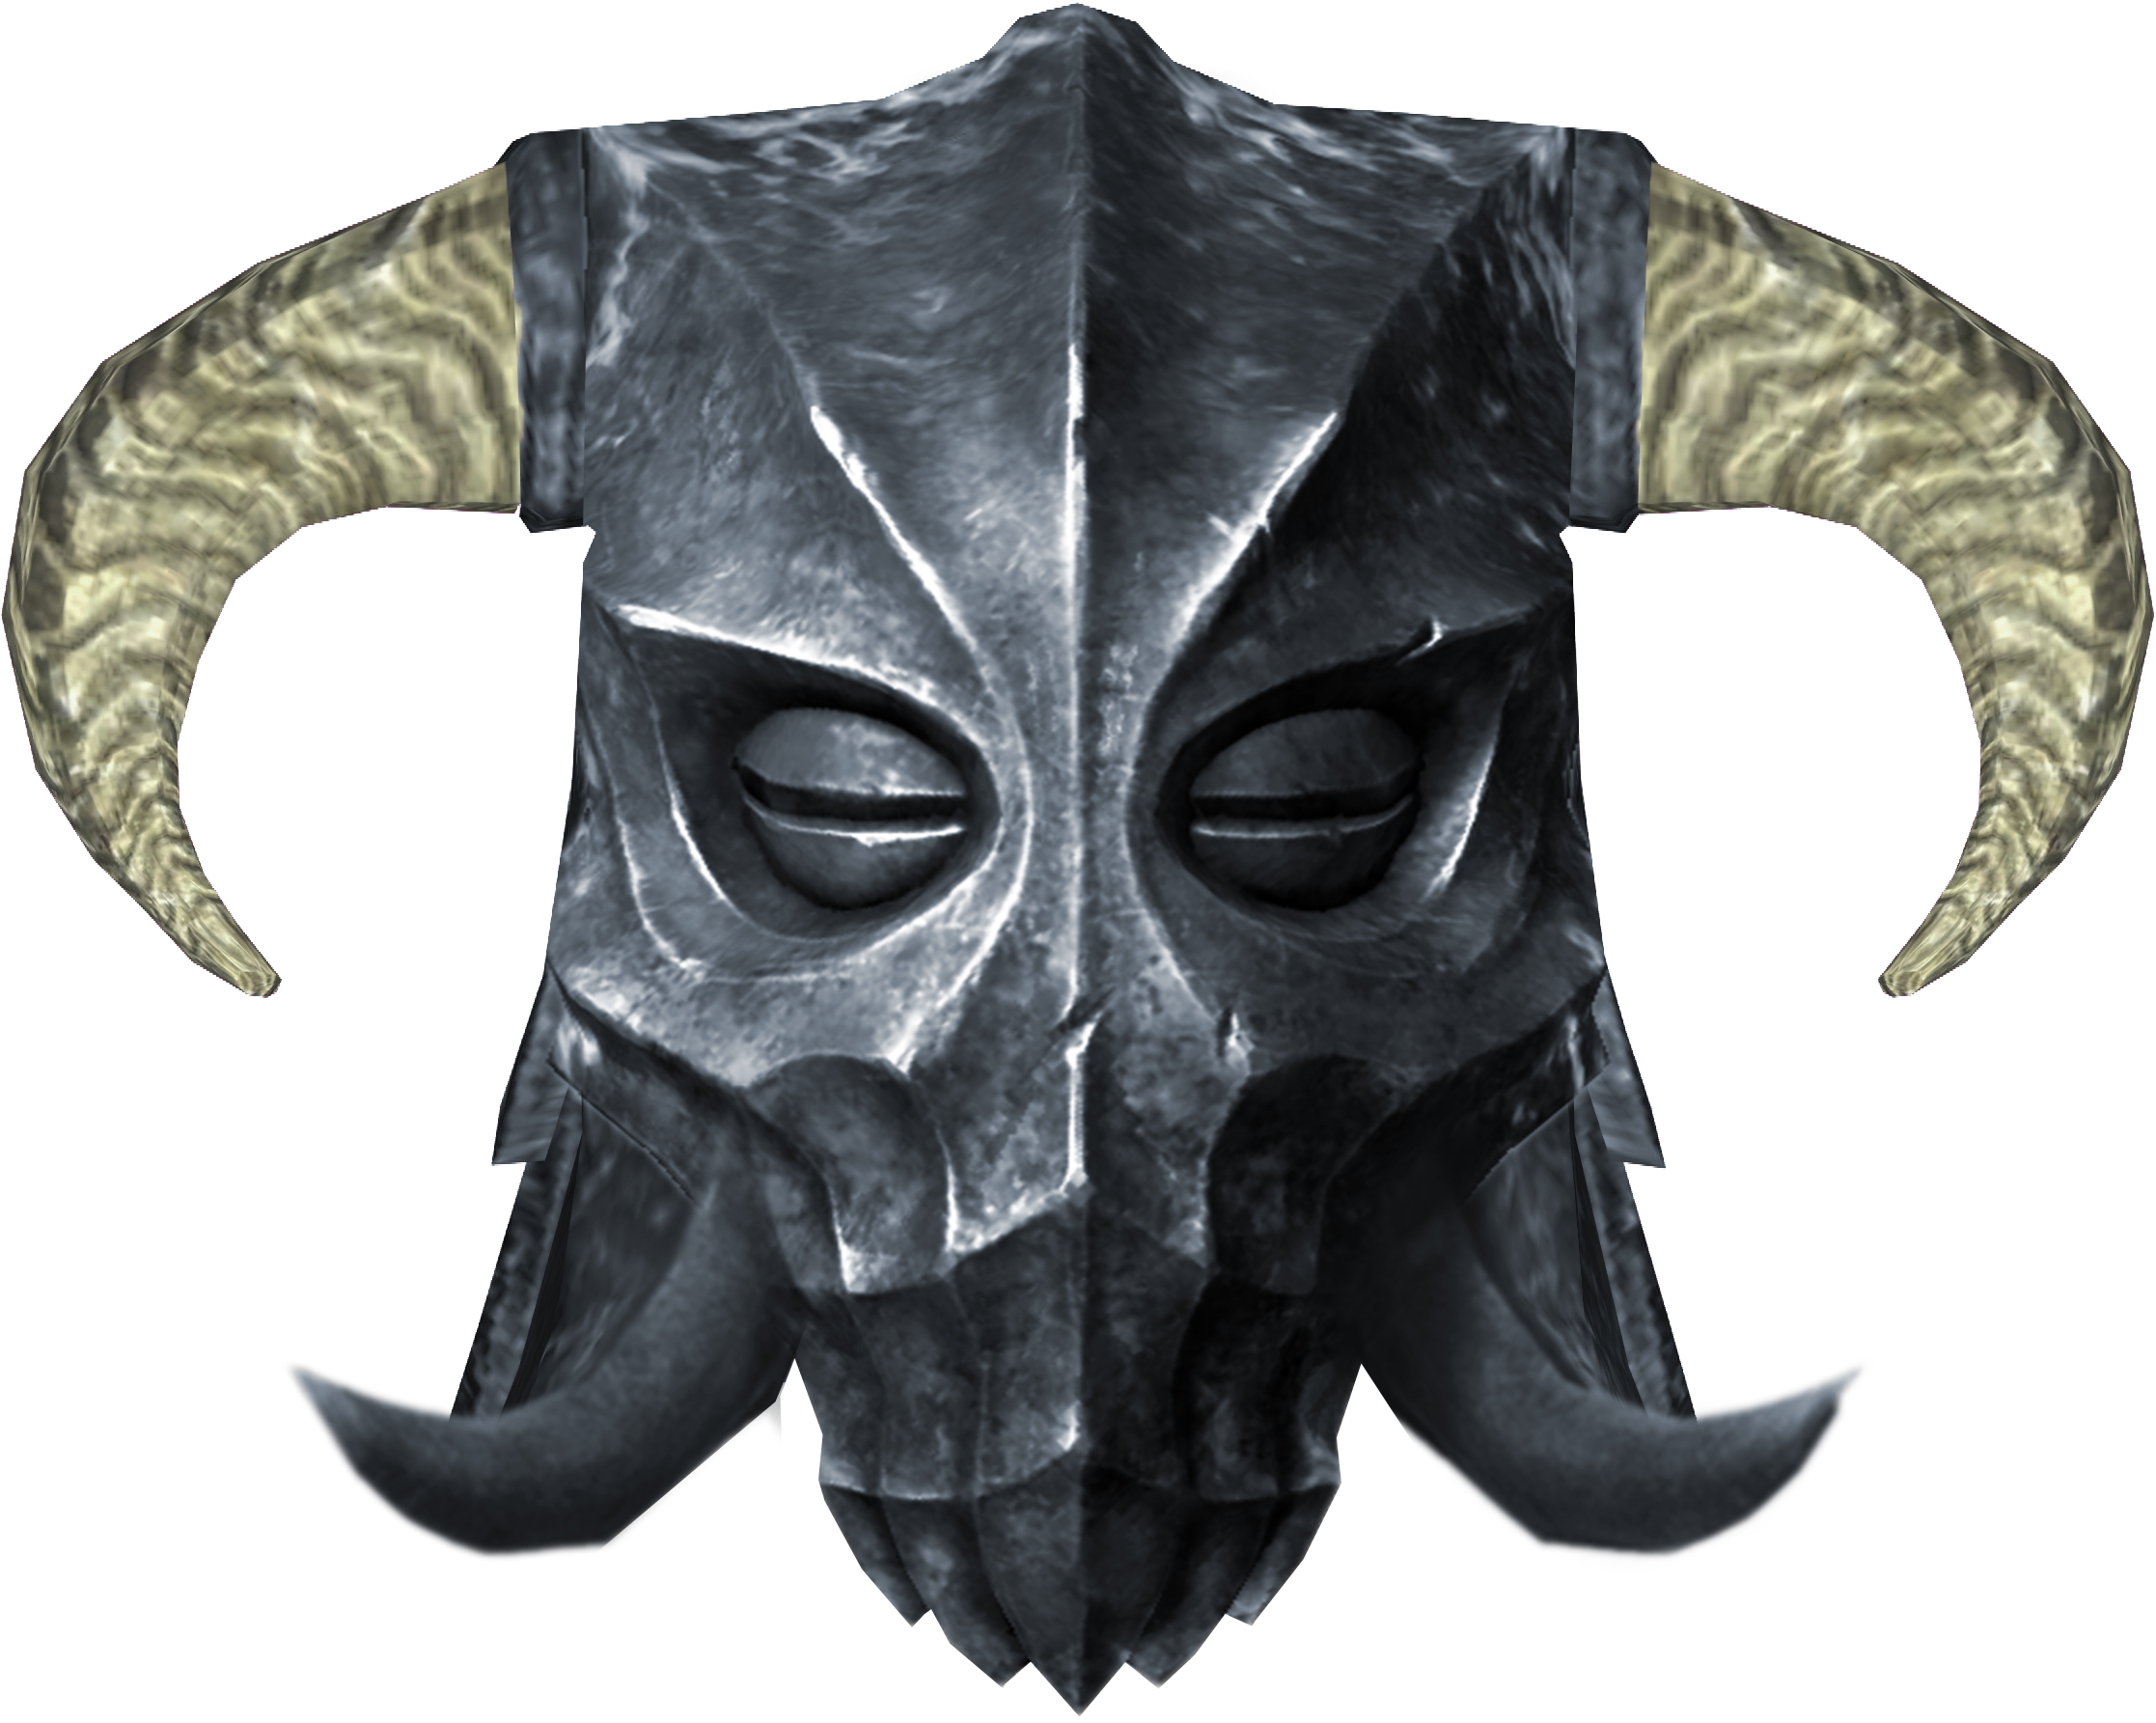 A Metal Mask With Horns